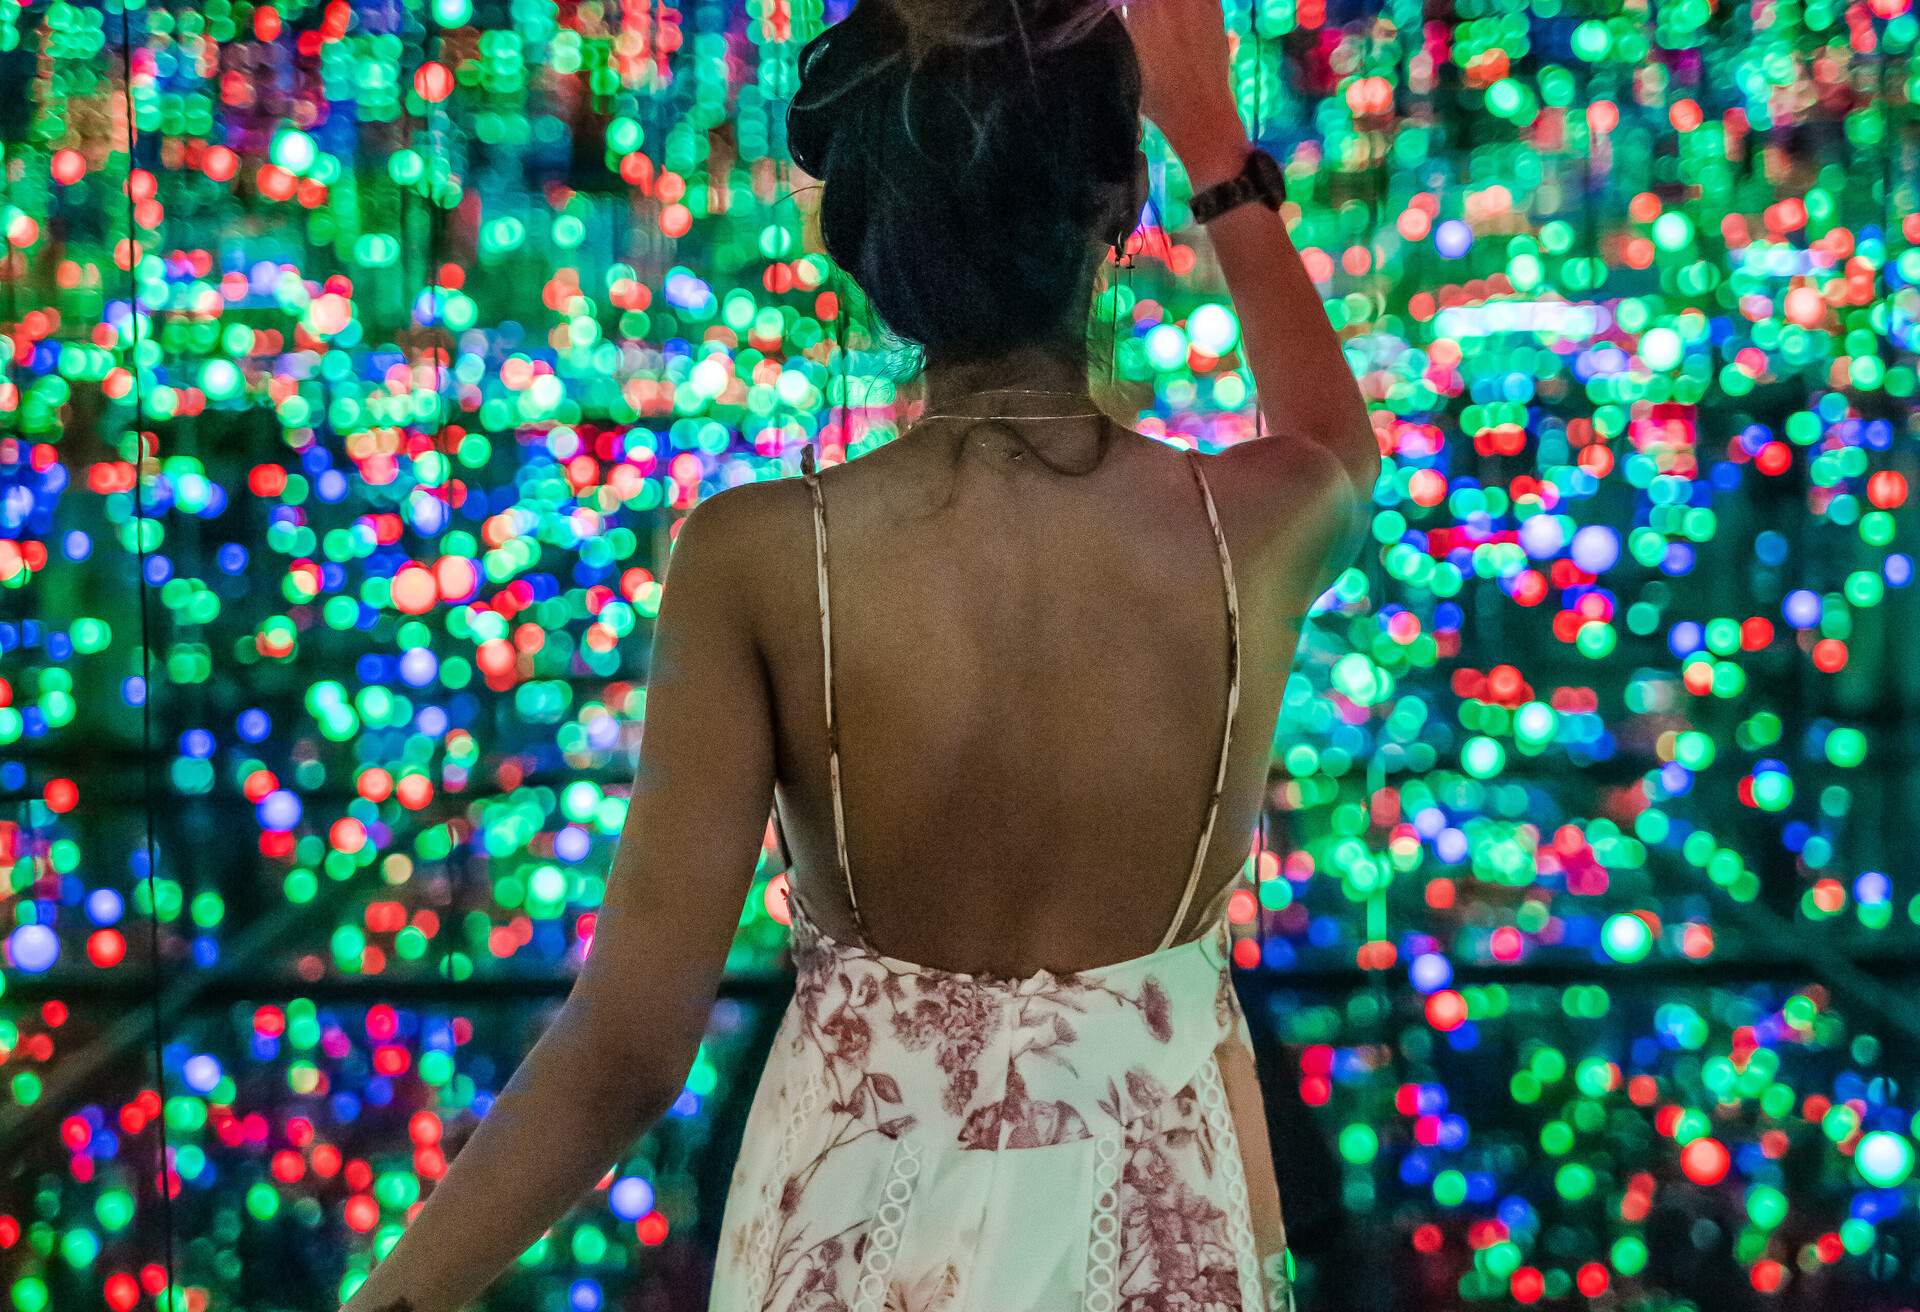 A woman in a dress pointing at small dots of red, green, and blue lights.